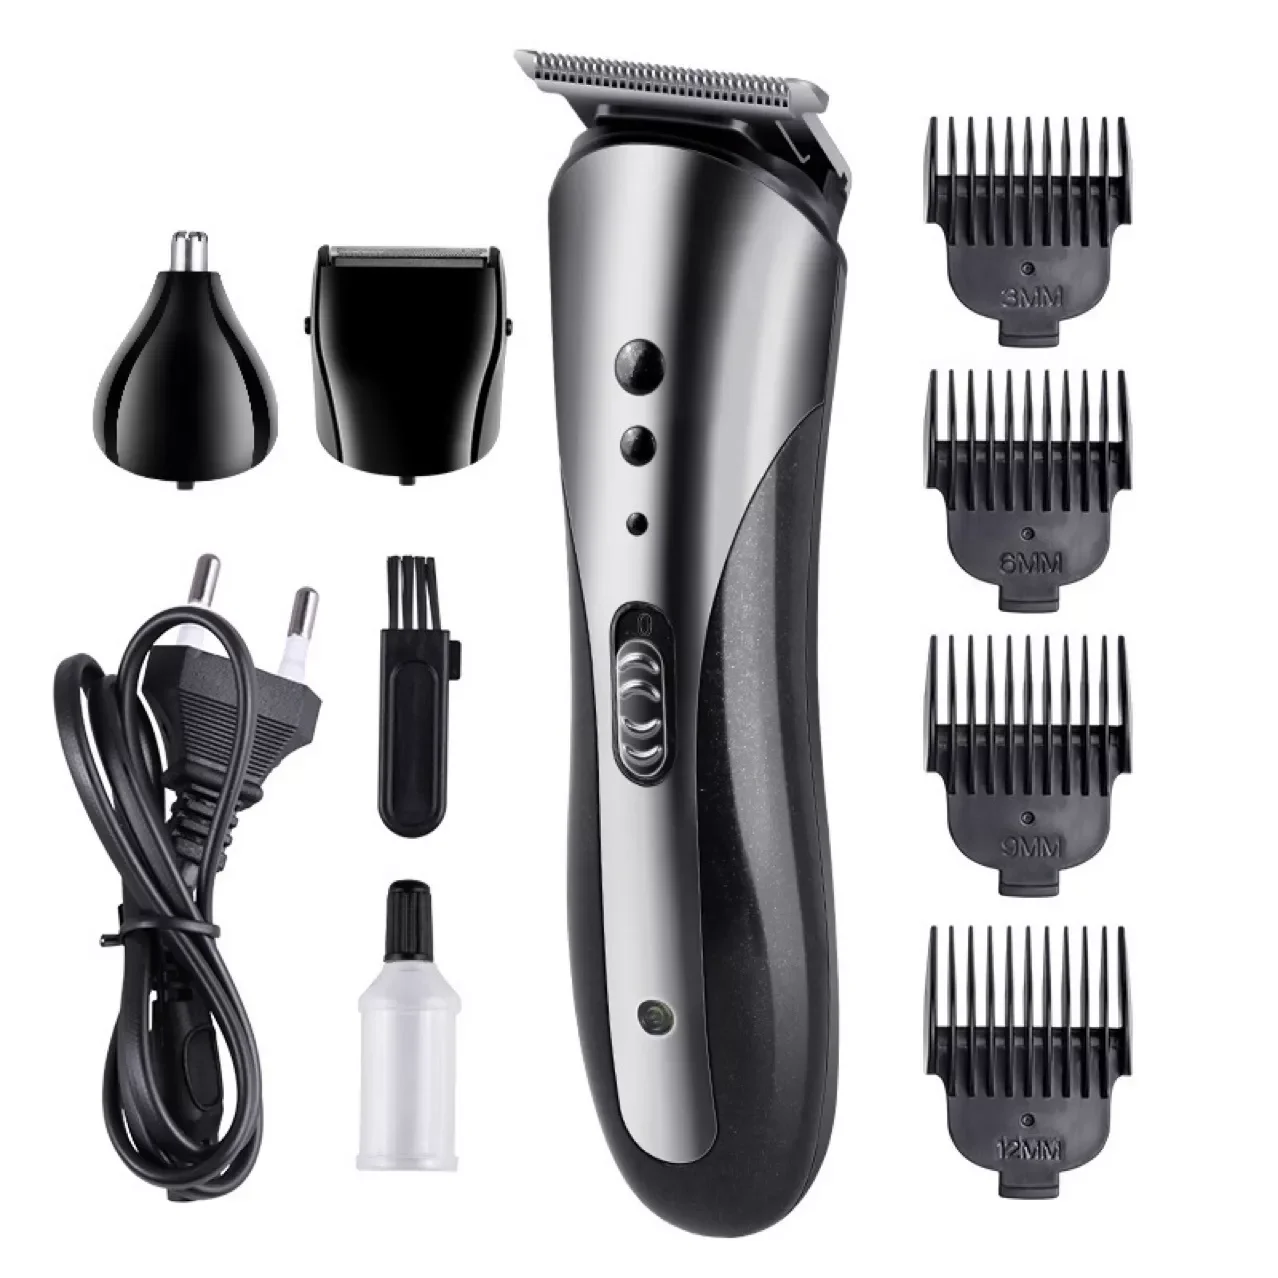 Multifunctional Split Hair Trimmer 3 In 1  Beard Shaver Nose Hair Trimmer Hair Clippers Blades Hair Cutting Machine enlarge